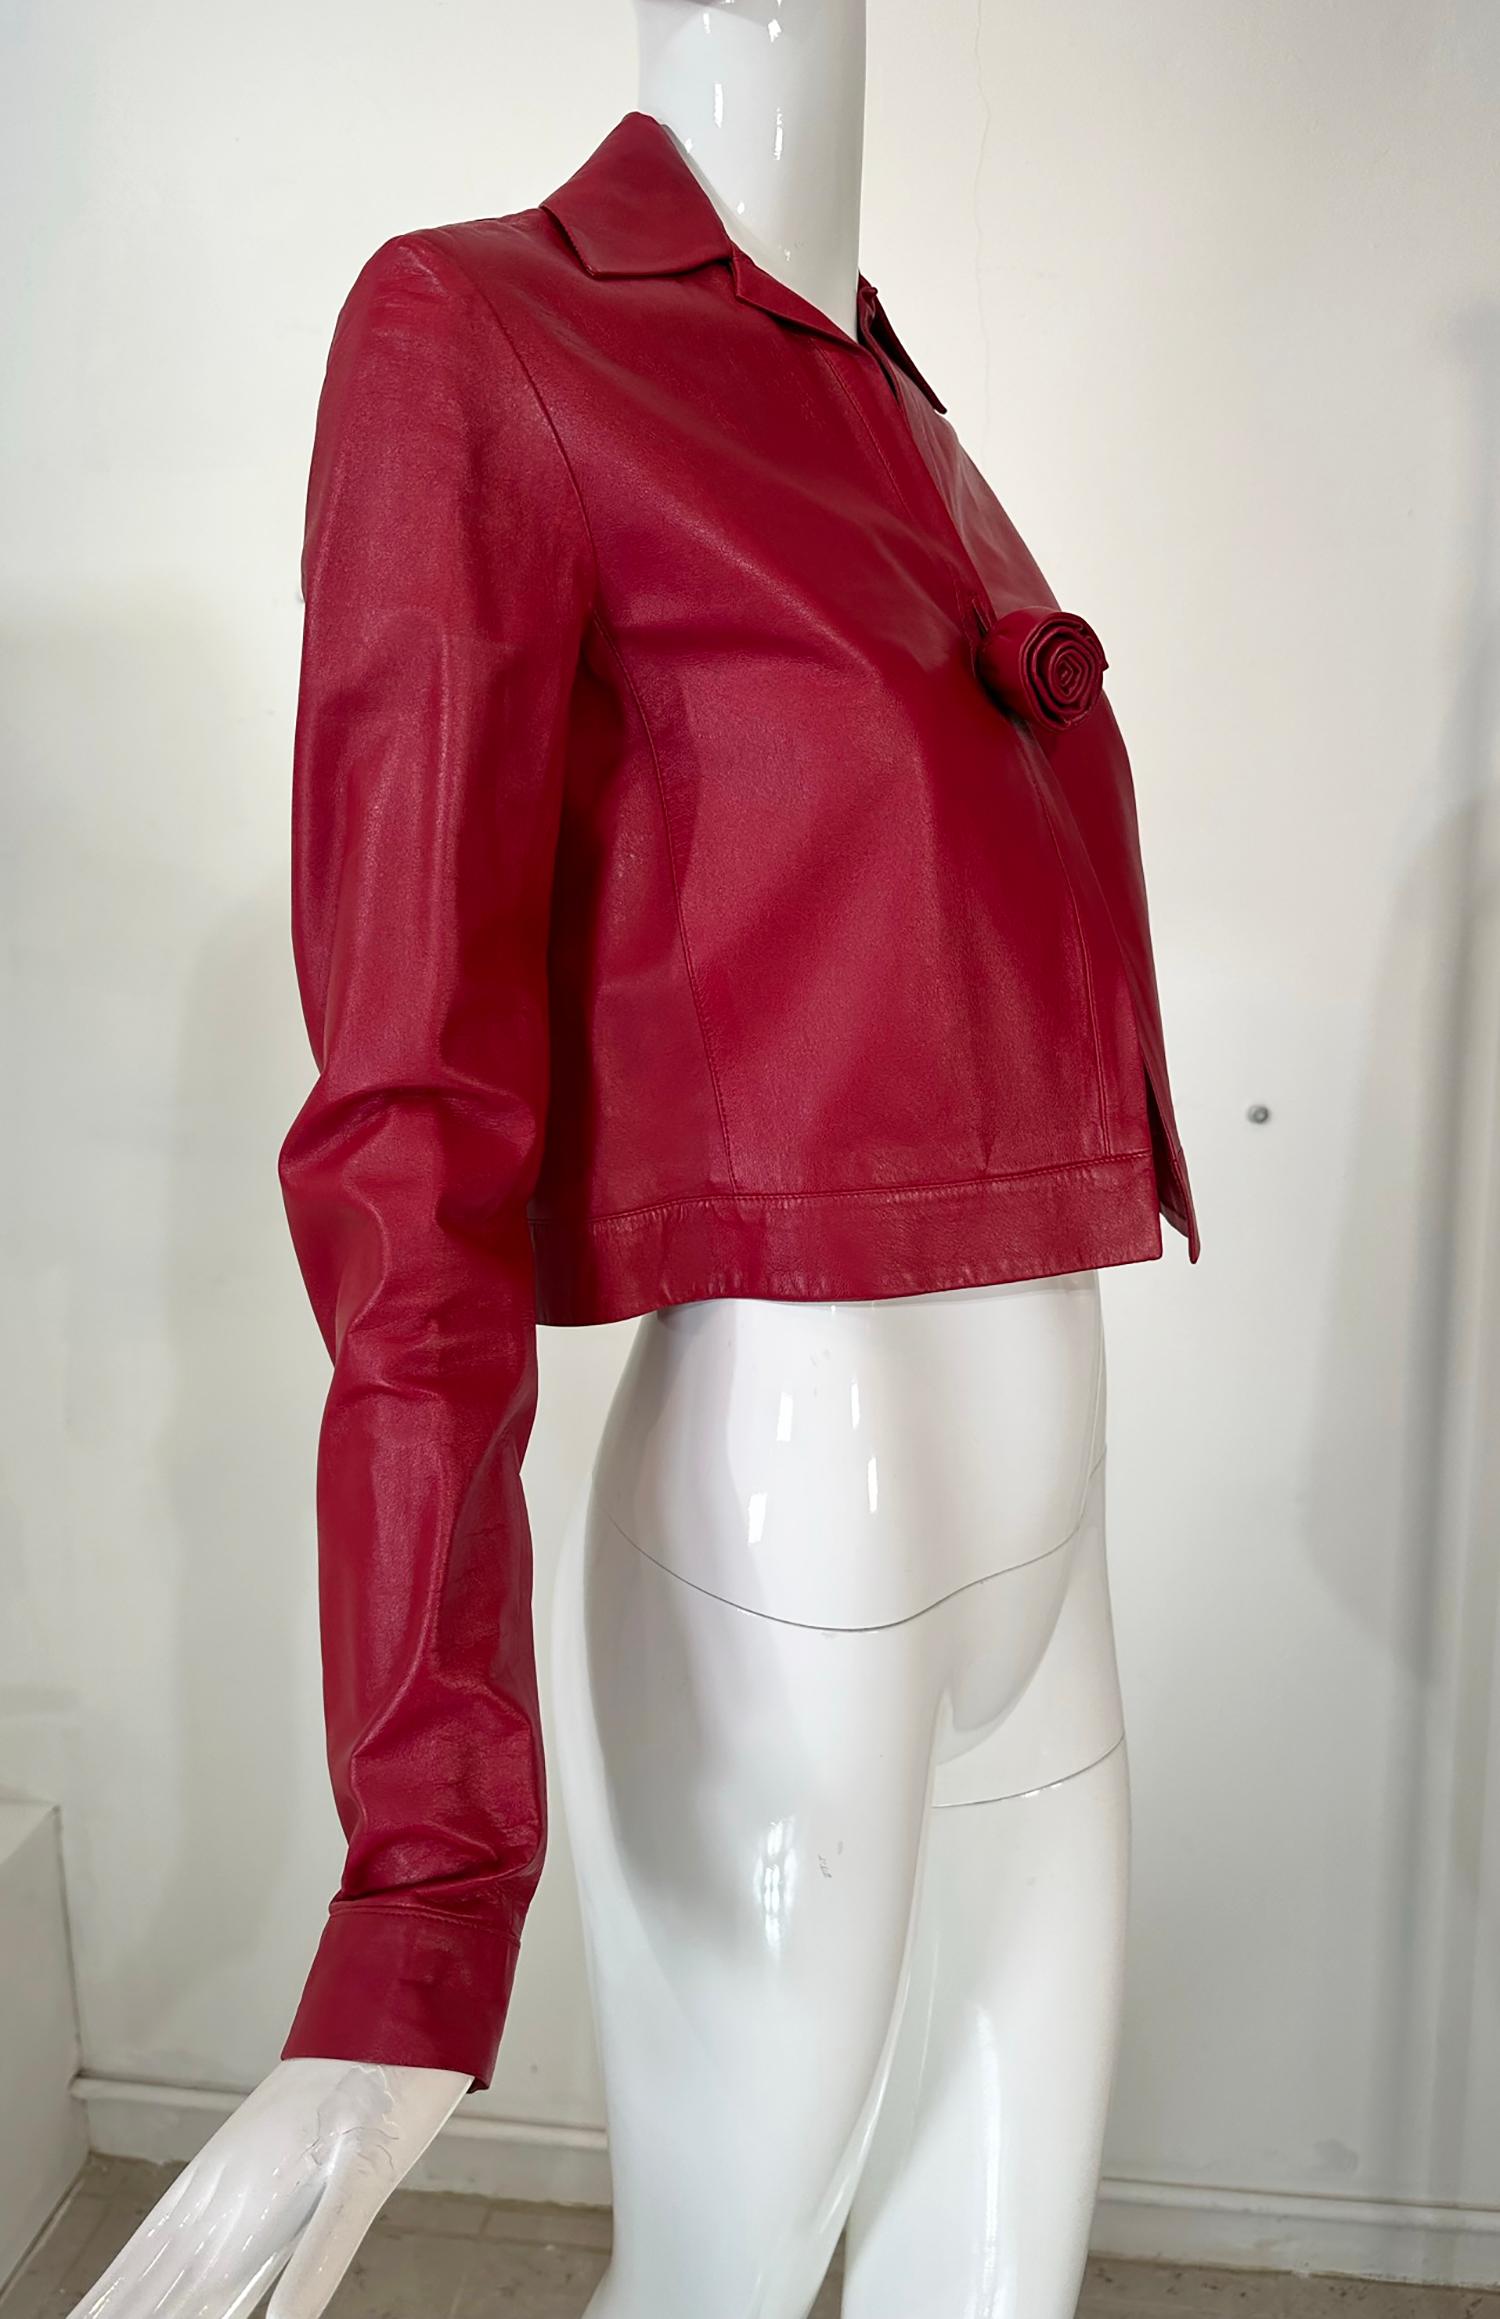 Romeo Gigli buttery soft garnet leather spencer style jacket with rose button front. A modern version of a Georgian fashion favourite, the Spencer jacket, the style is cropped with a single crafted leather rose button at the bust center front. Wing